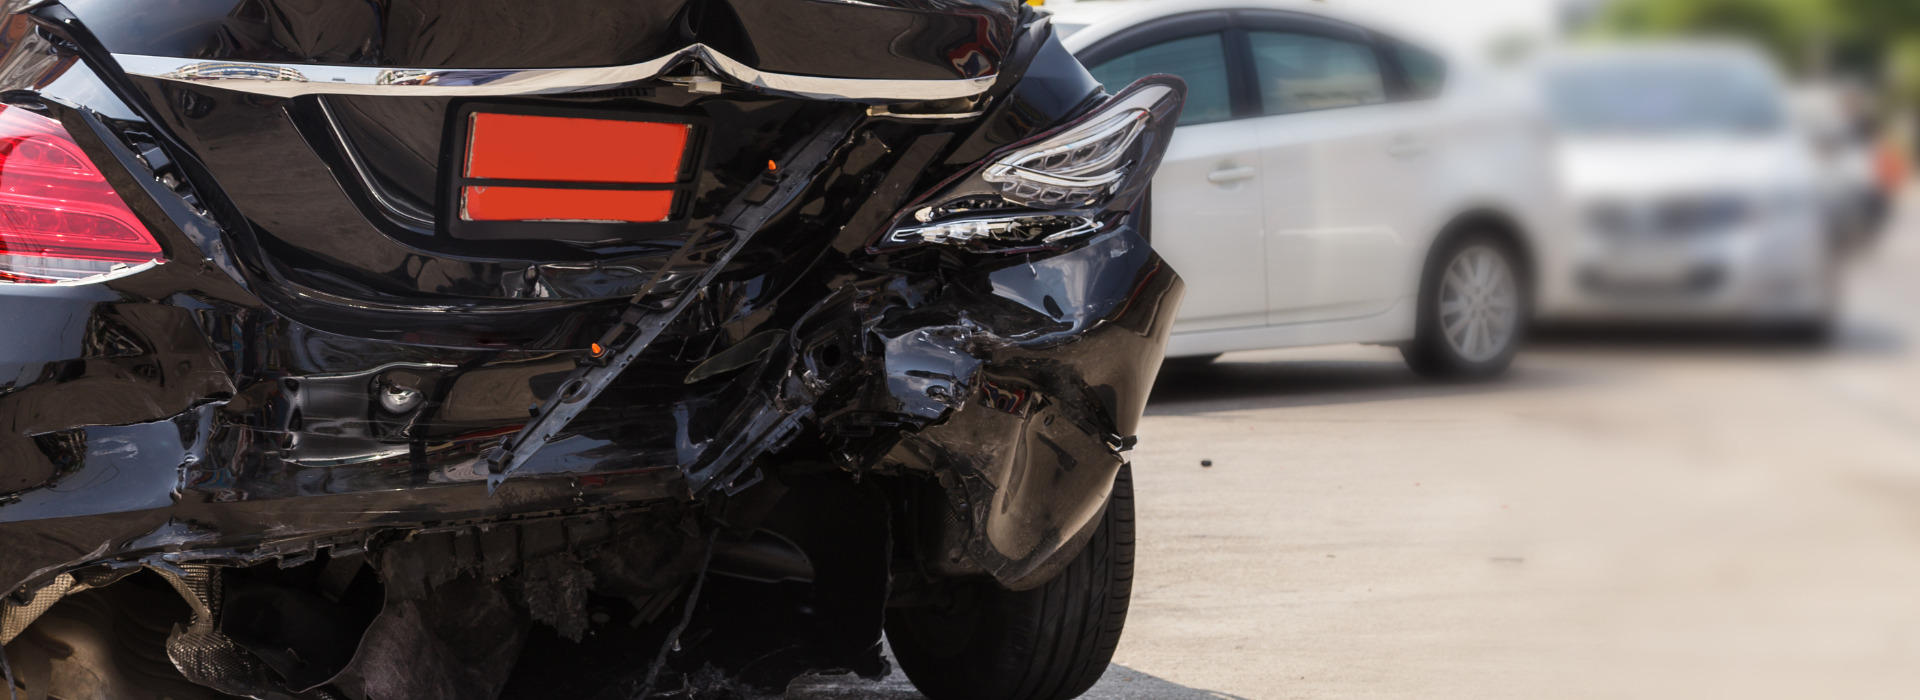 How Long Will My Car Accident Injury Claim Take